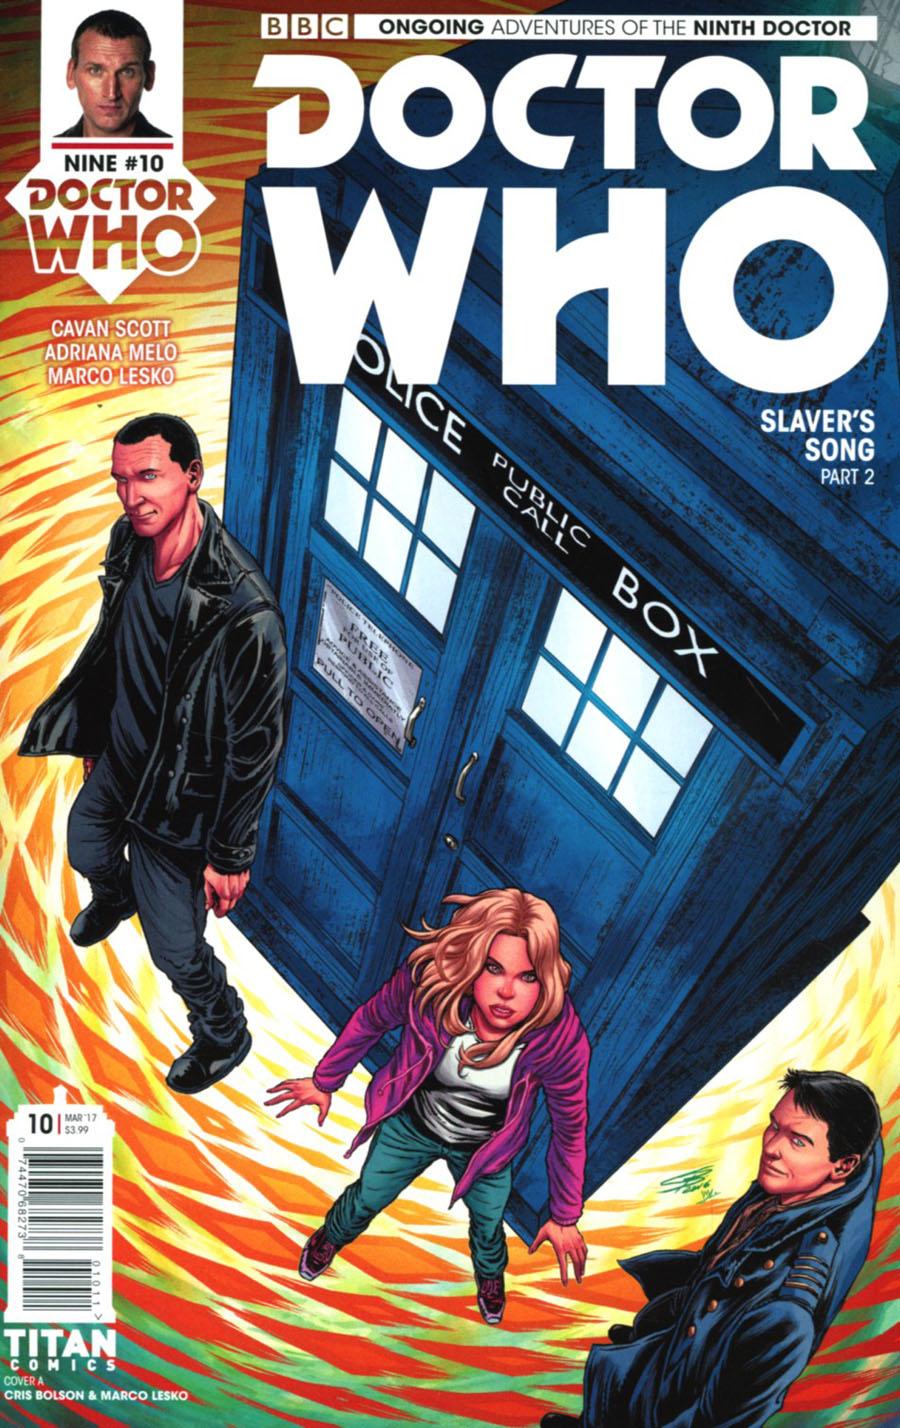 Doctor Who 9th Doctor Vol. 2 #10